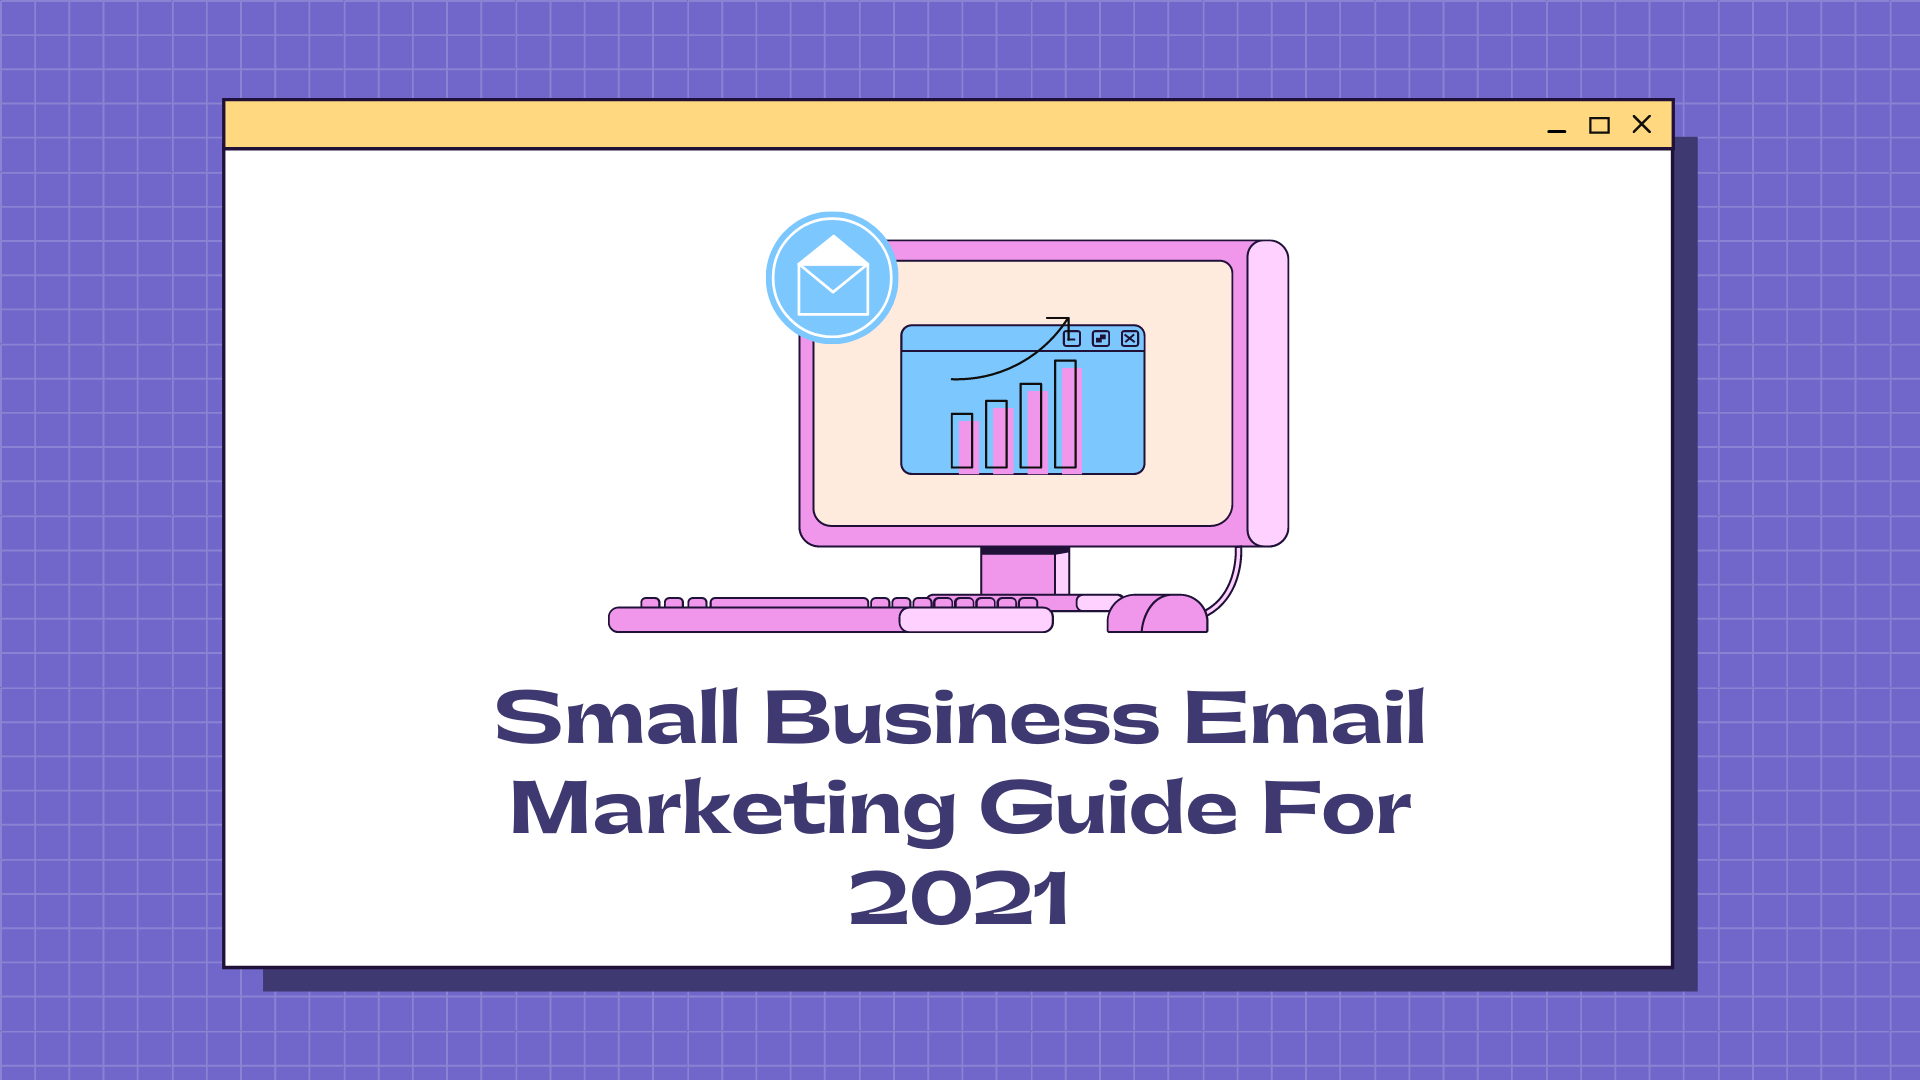 Small business email marketing guide